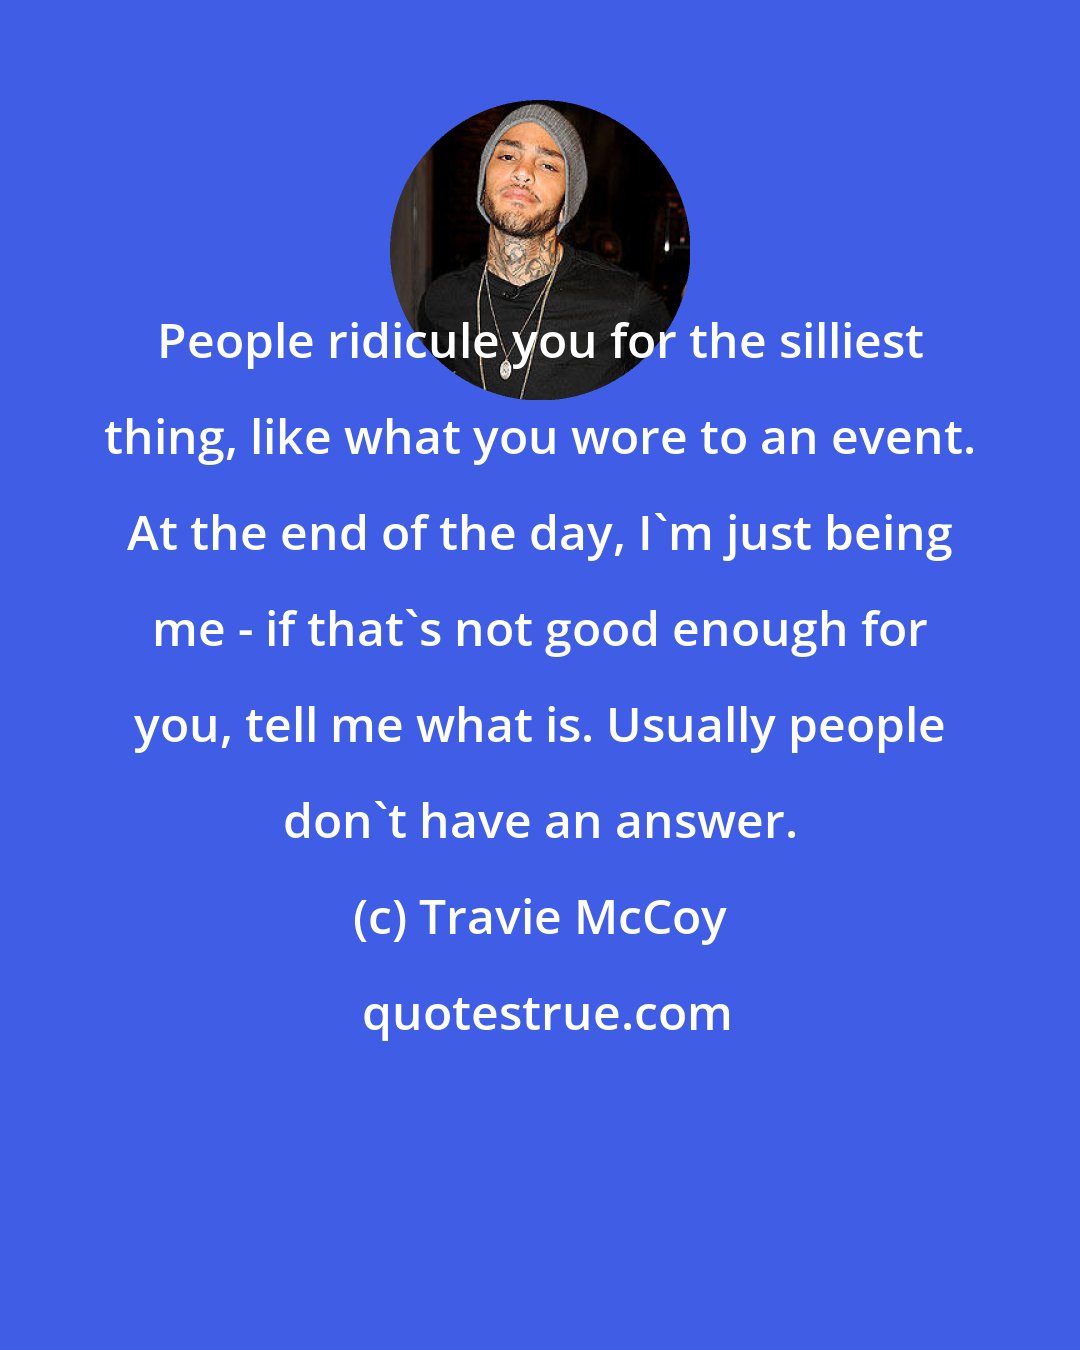 Travie McCoy: People ridicule you for the silliest thing, like what you wore to an event. At the end of the day, I'm just being me - if that's not good enough for you, tell me what is. Usually people don't have an answer.